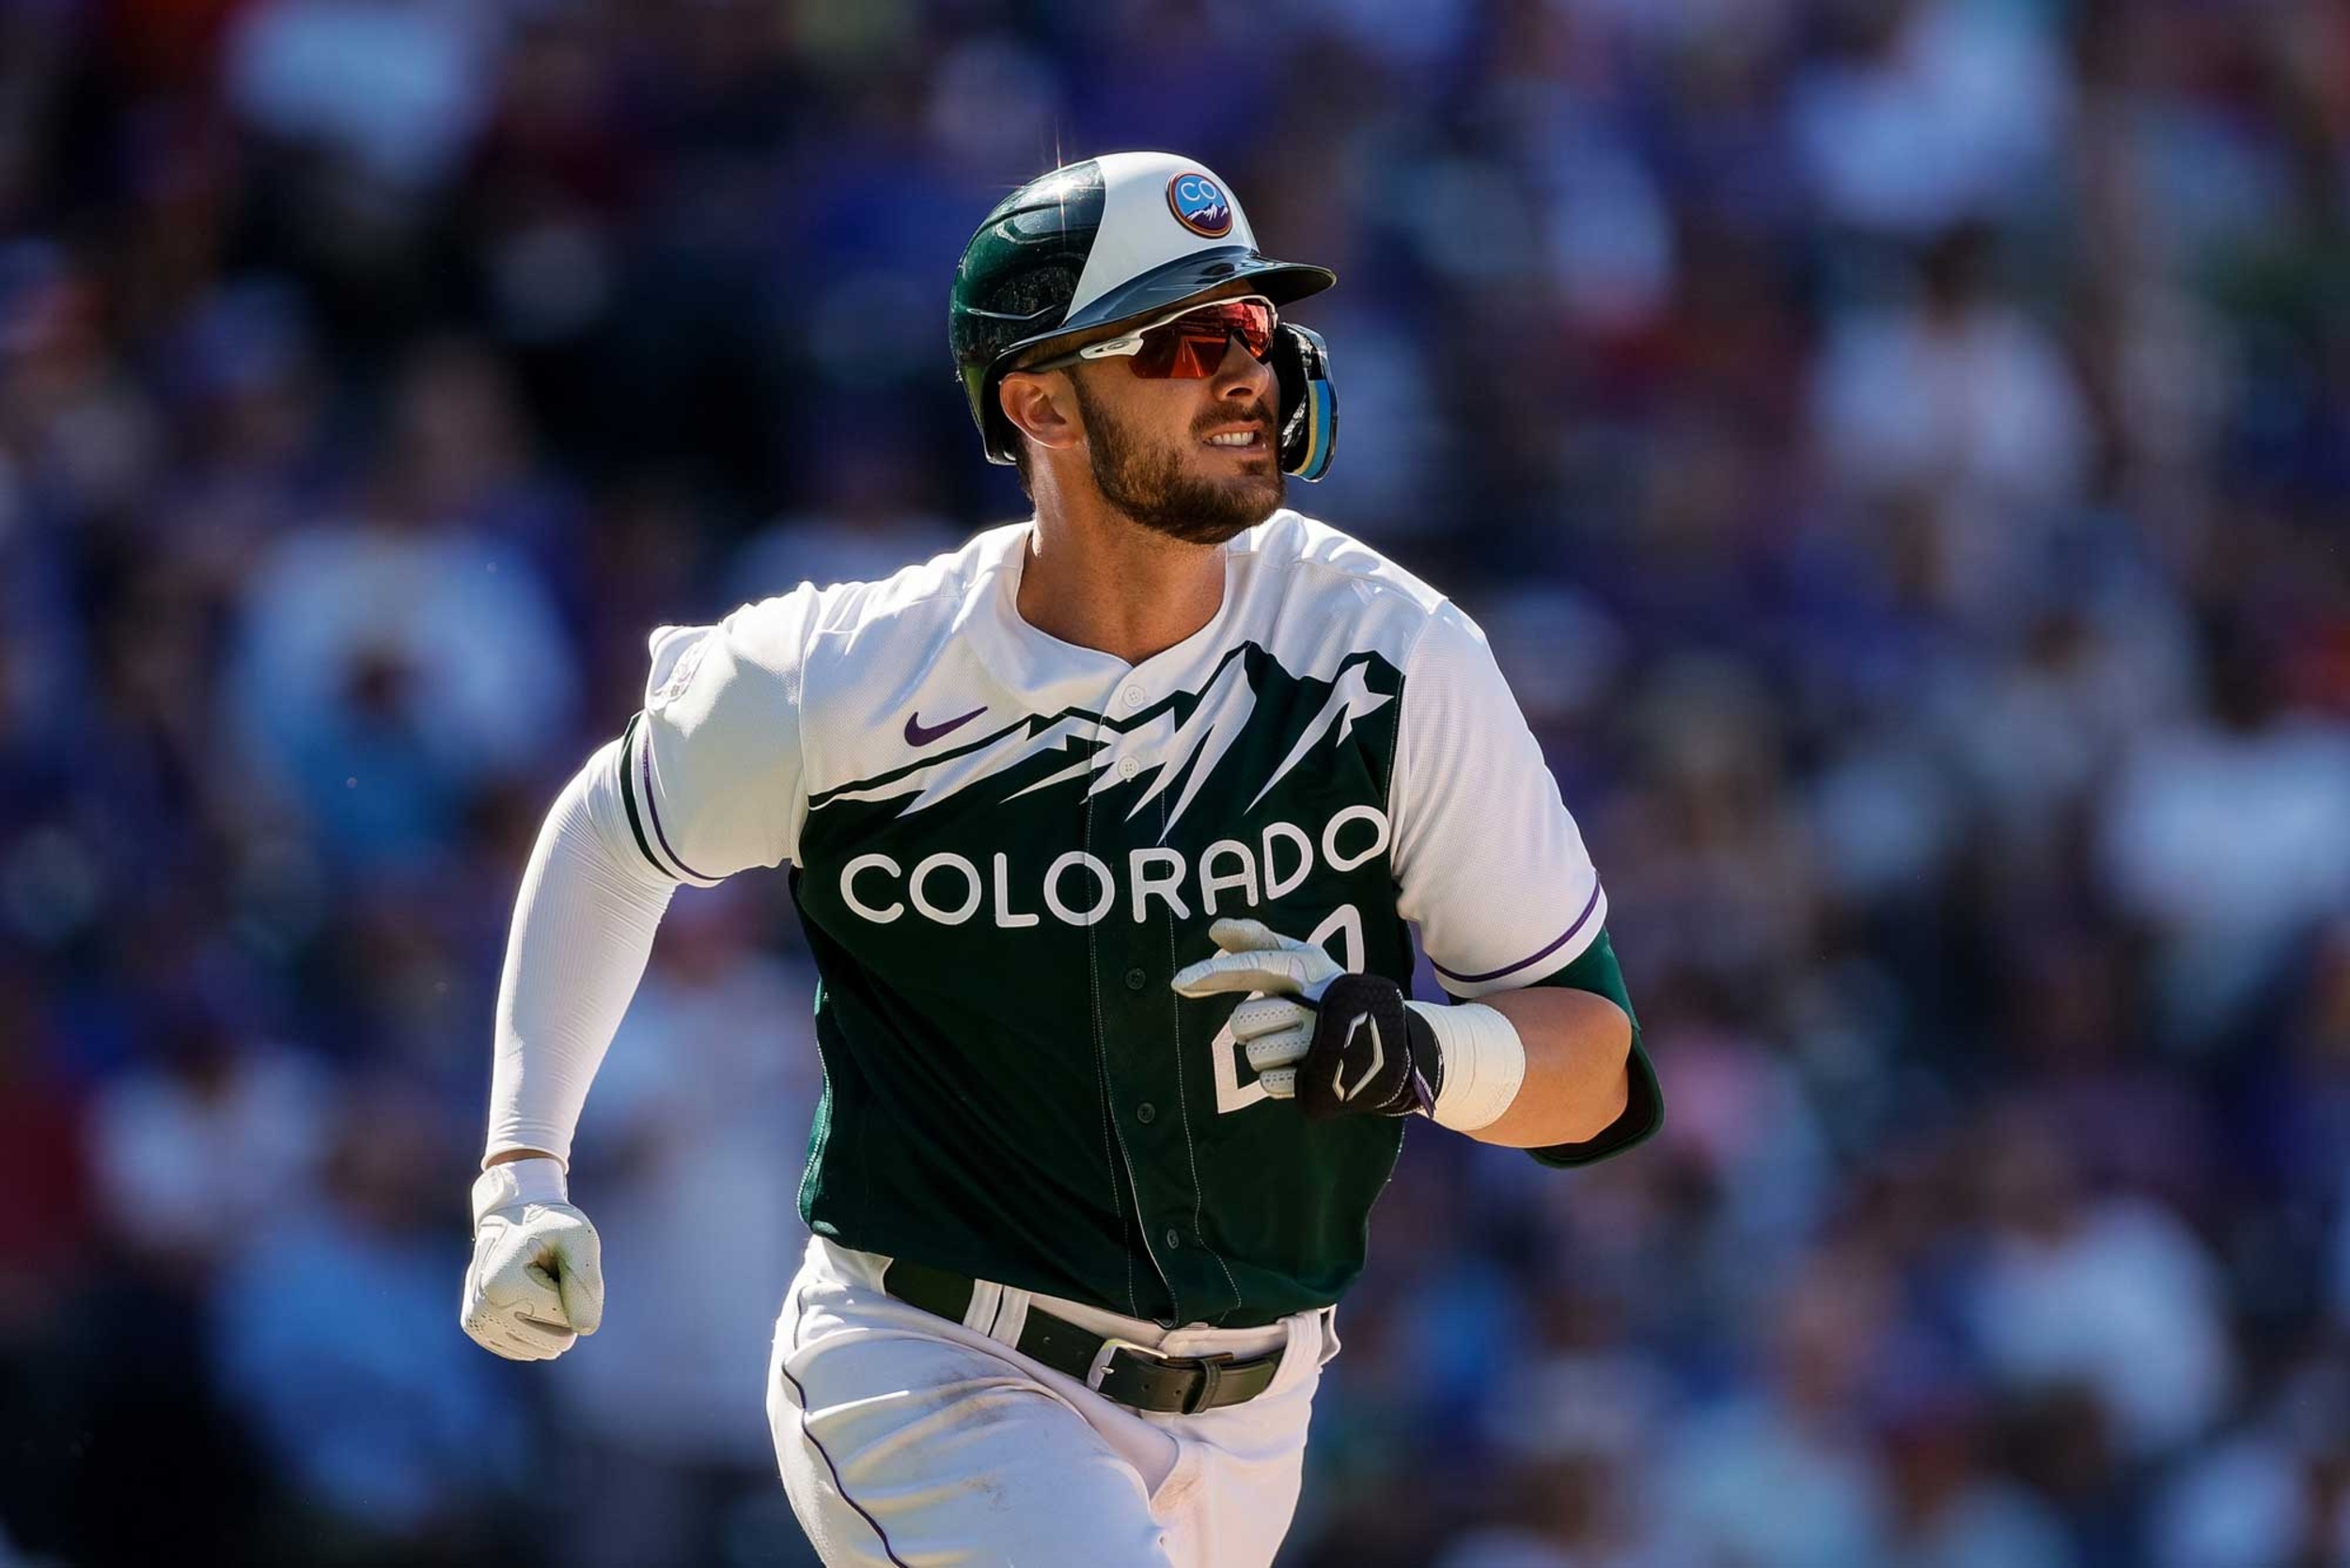 <p>Bryant has been an extreme disappointment since signing with Colorado two years ago, playing a total of 122 games due to injuries. The Rockies will move Bryant to first base this season to help keep him healthy, and they desperately need the former MVP to deliver as their banged-up pitching staff gets healthy.</p><p>You may also like: <a href='https://www.yardbarker.com/mlb/articles/the_most_unlikely_world_series_teams_022924/s1__38883114'>The most unlikely World Series teams</a></p>